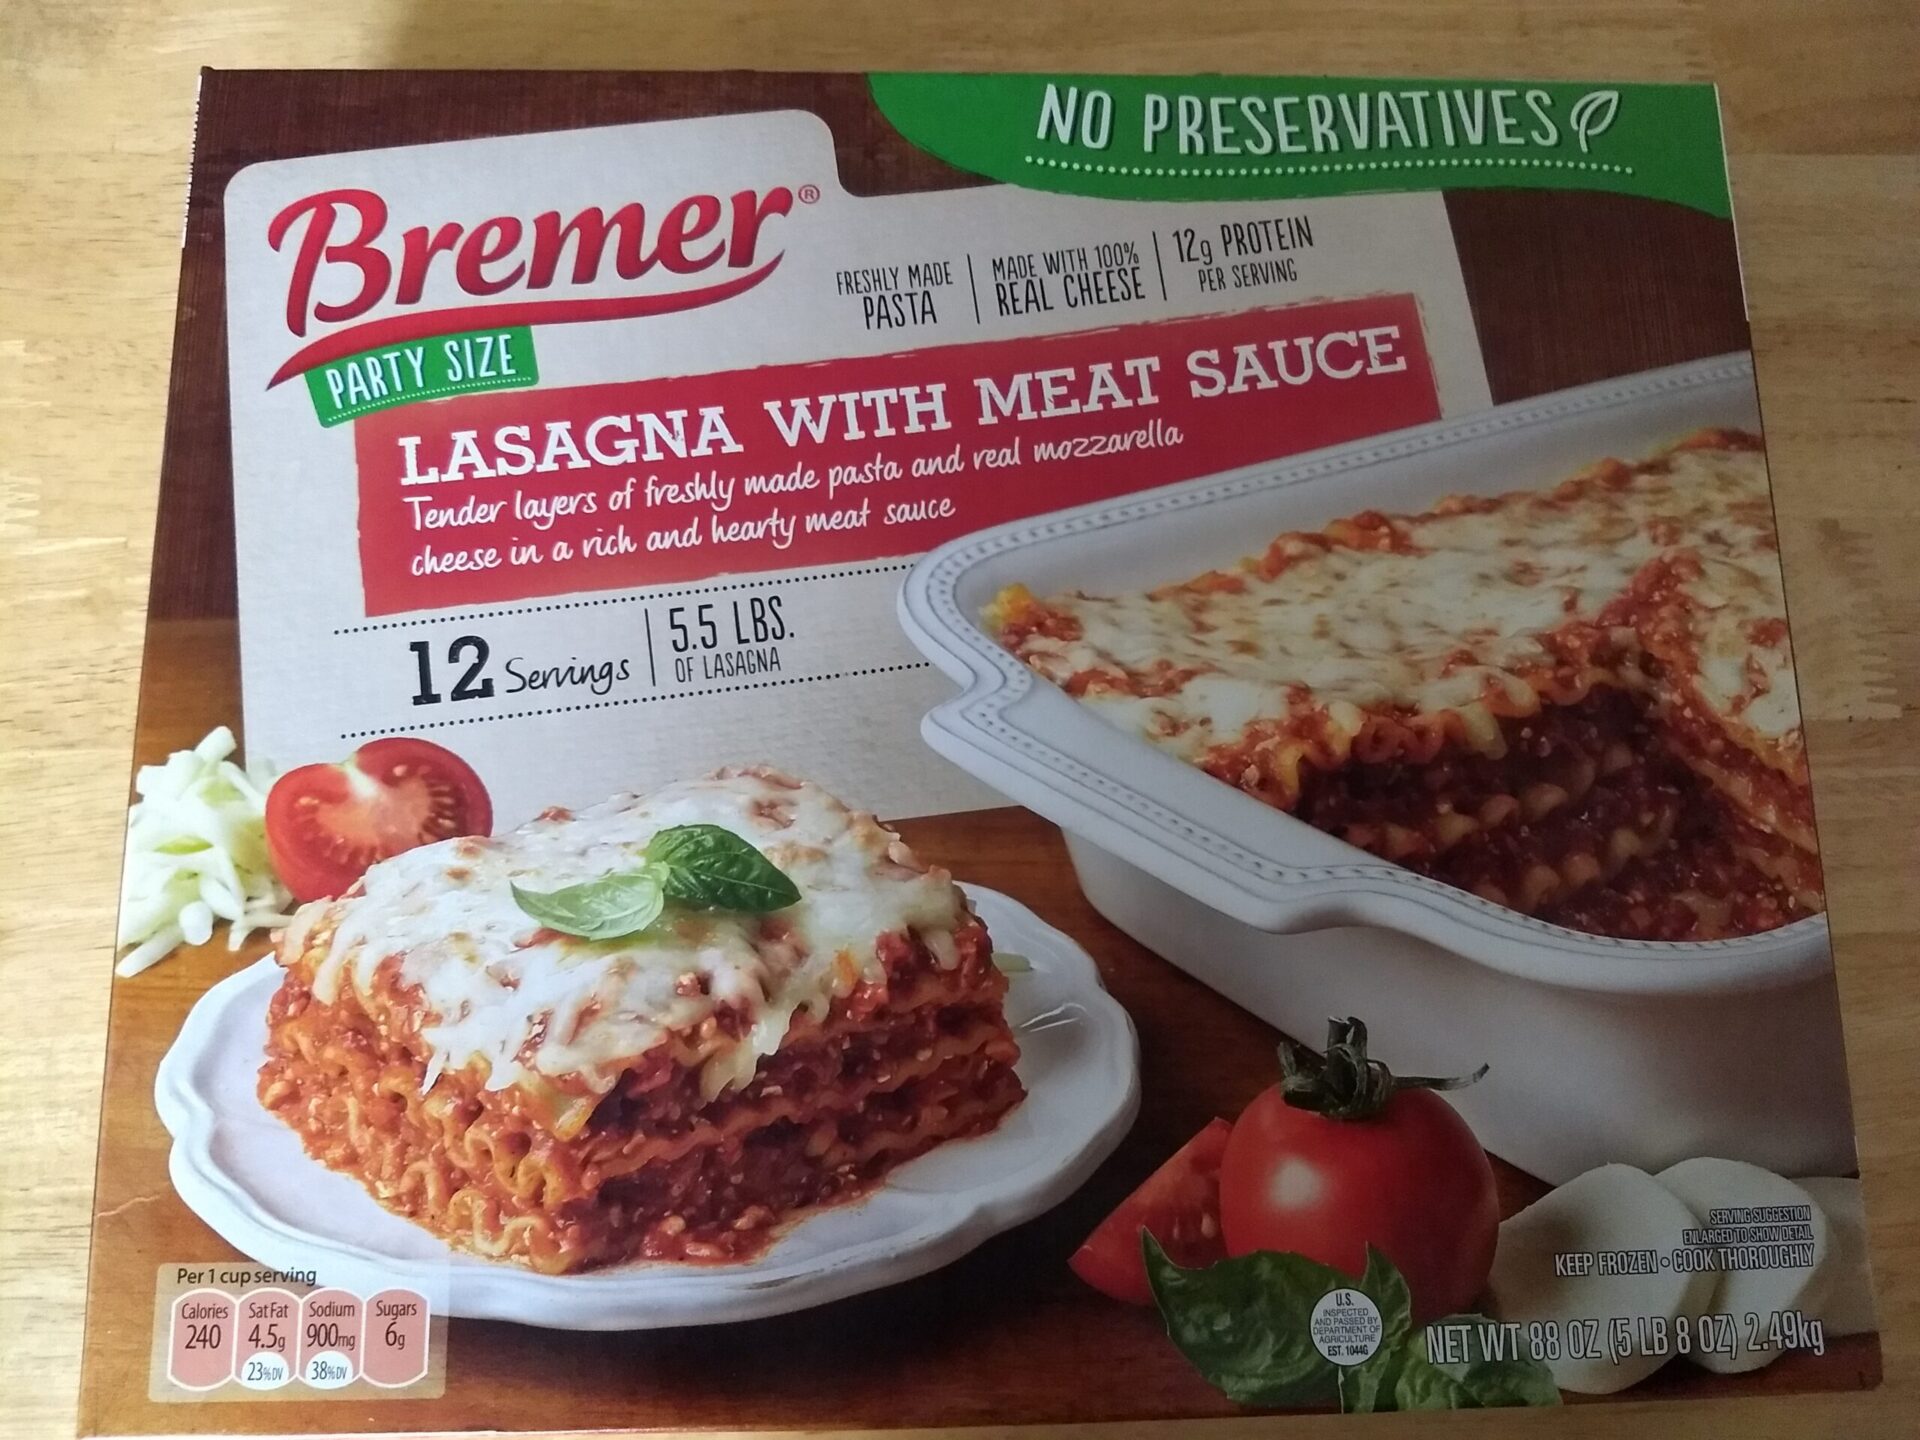 Bremer Party Size Lasagna with Meat Sauce